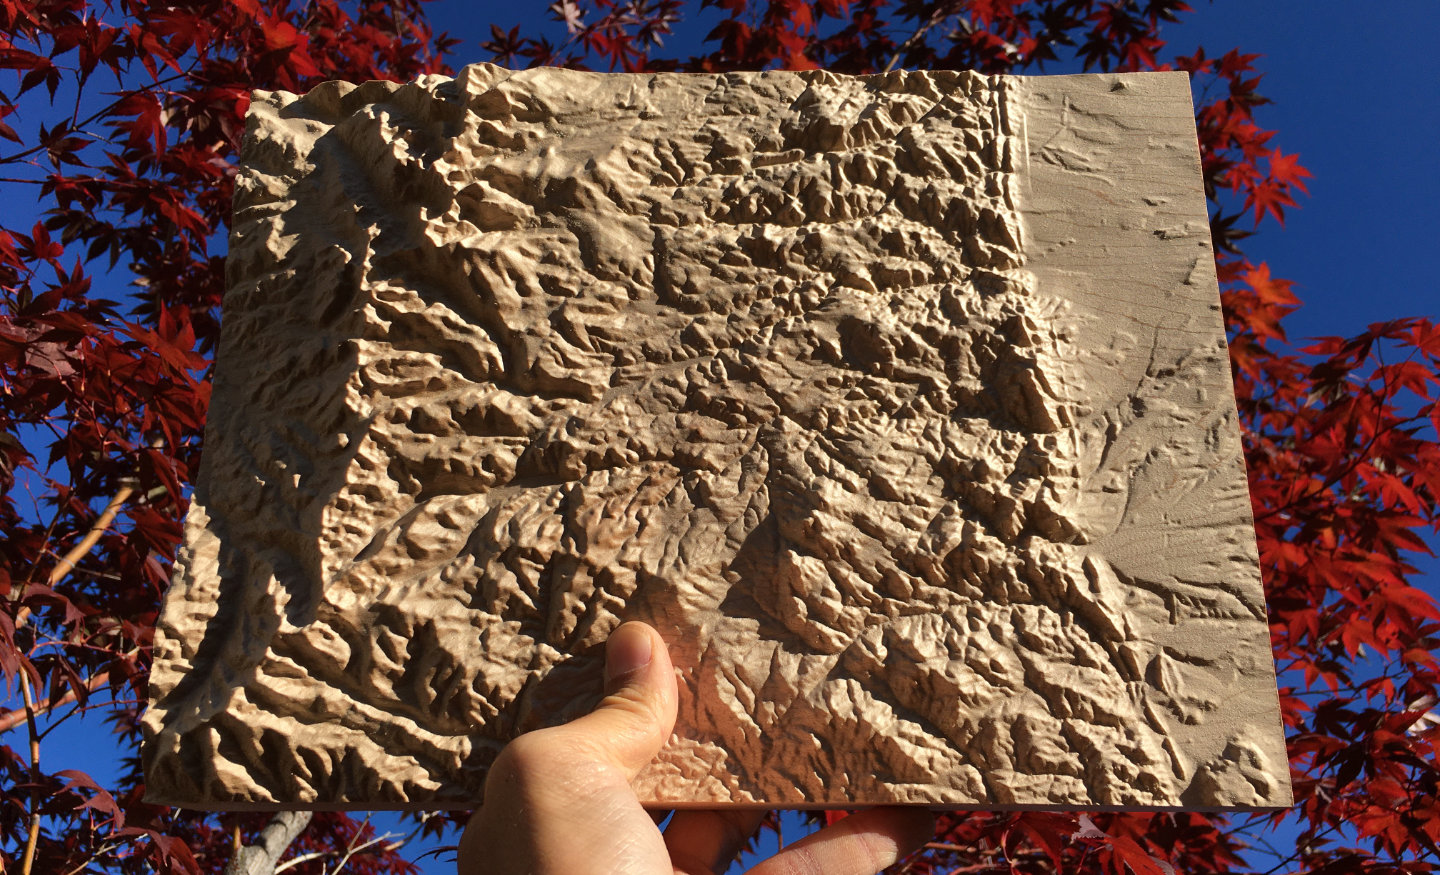 three-dimensional wood-carved relief map of the Rocky Mountains near Boulder, Colorado, United States